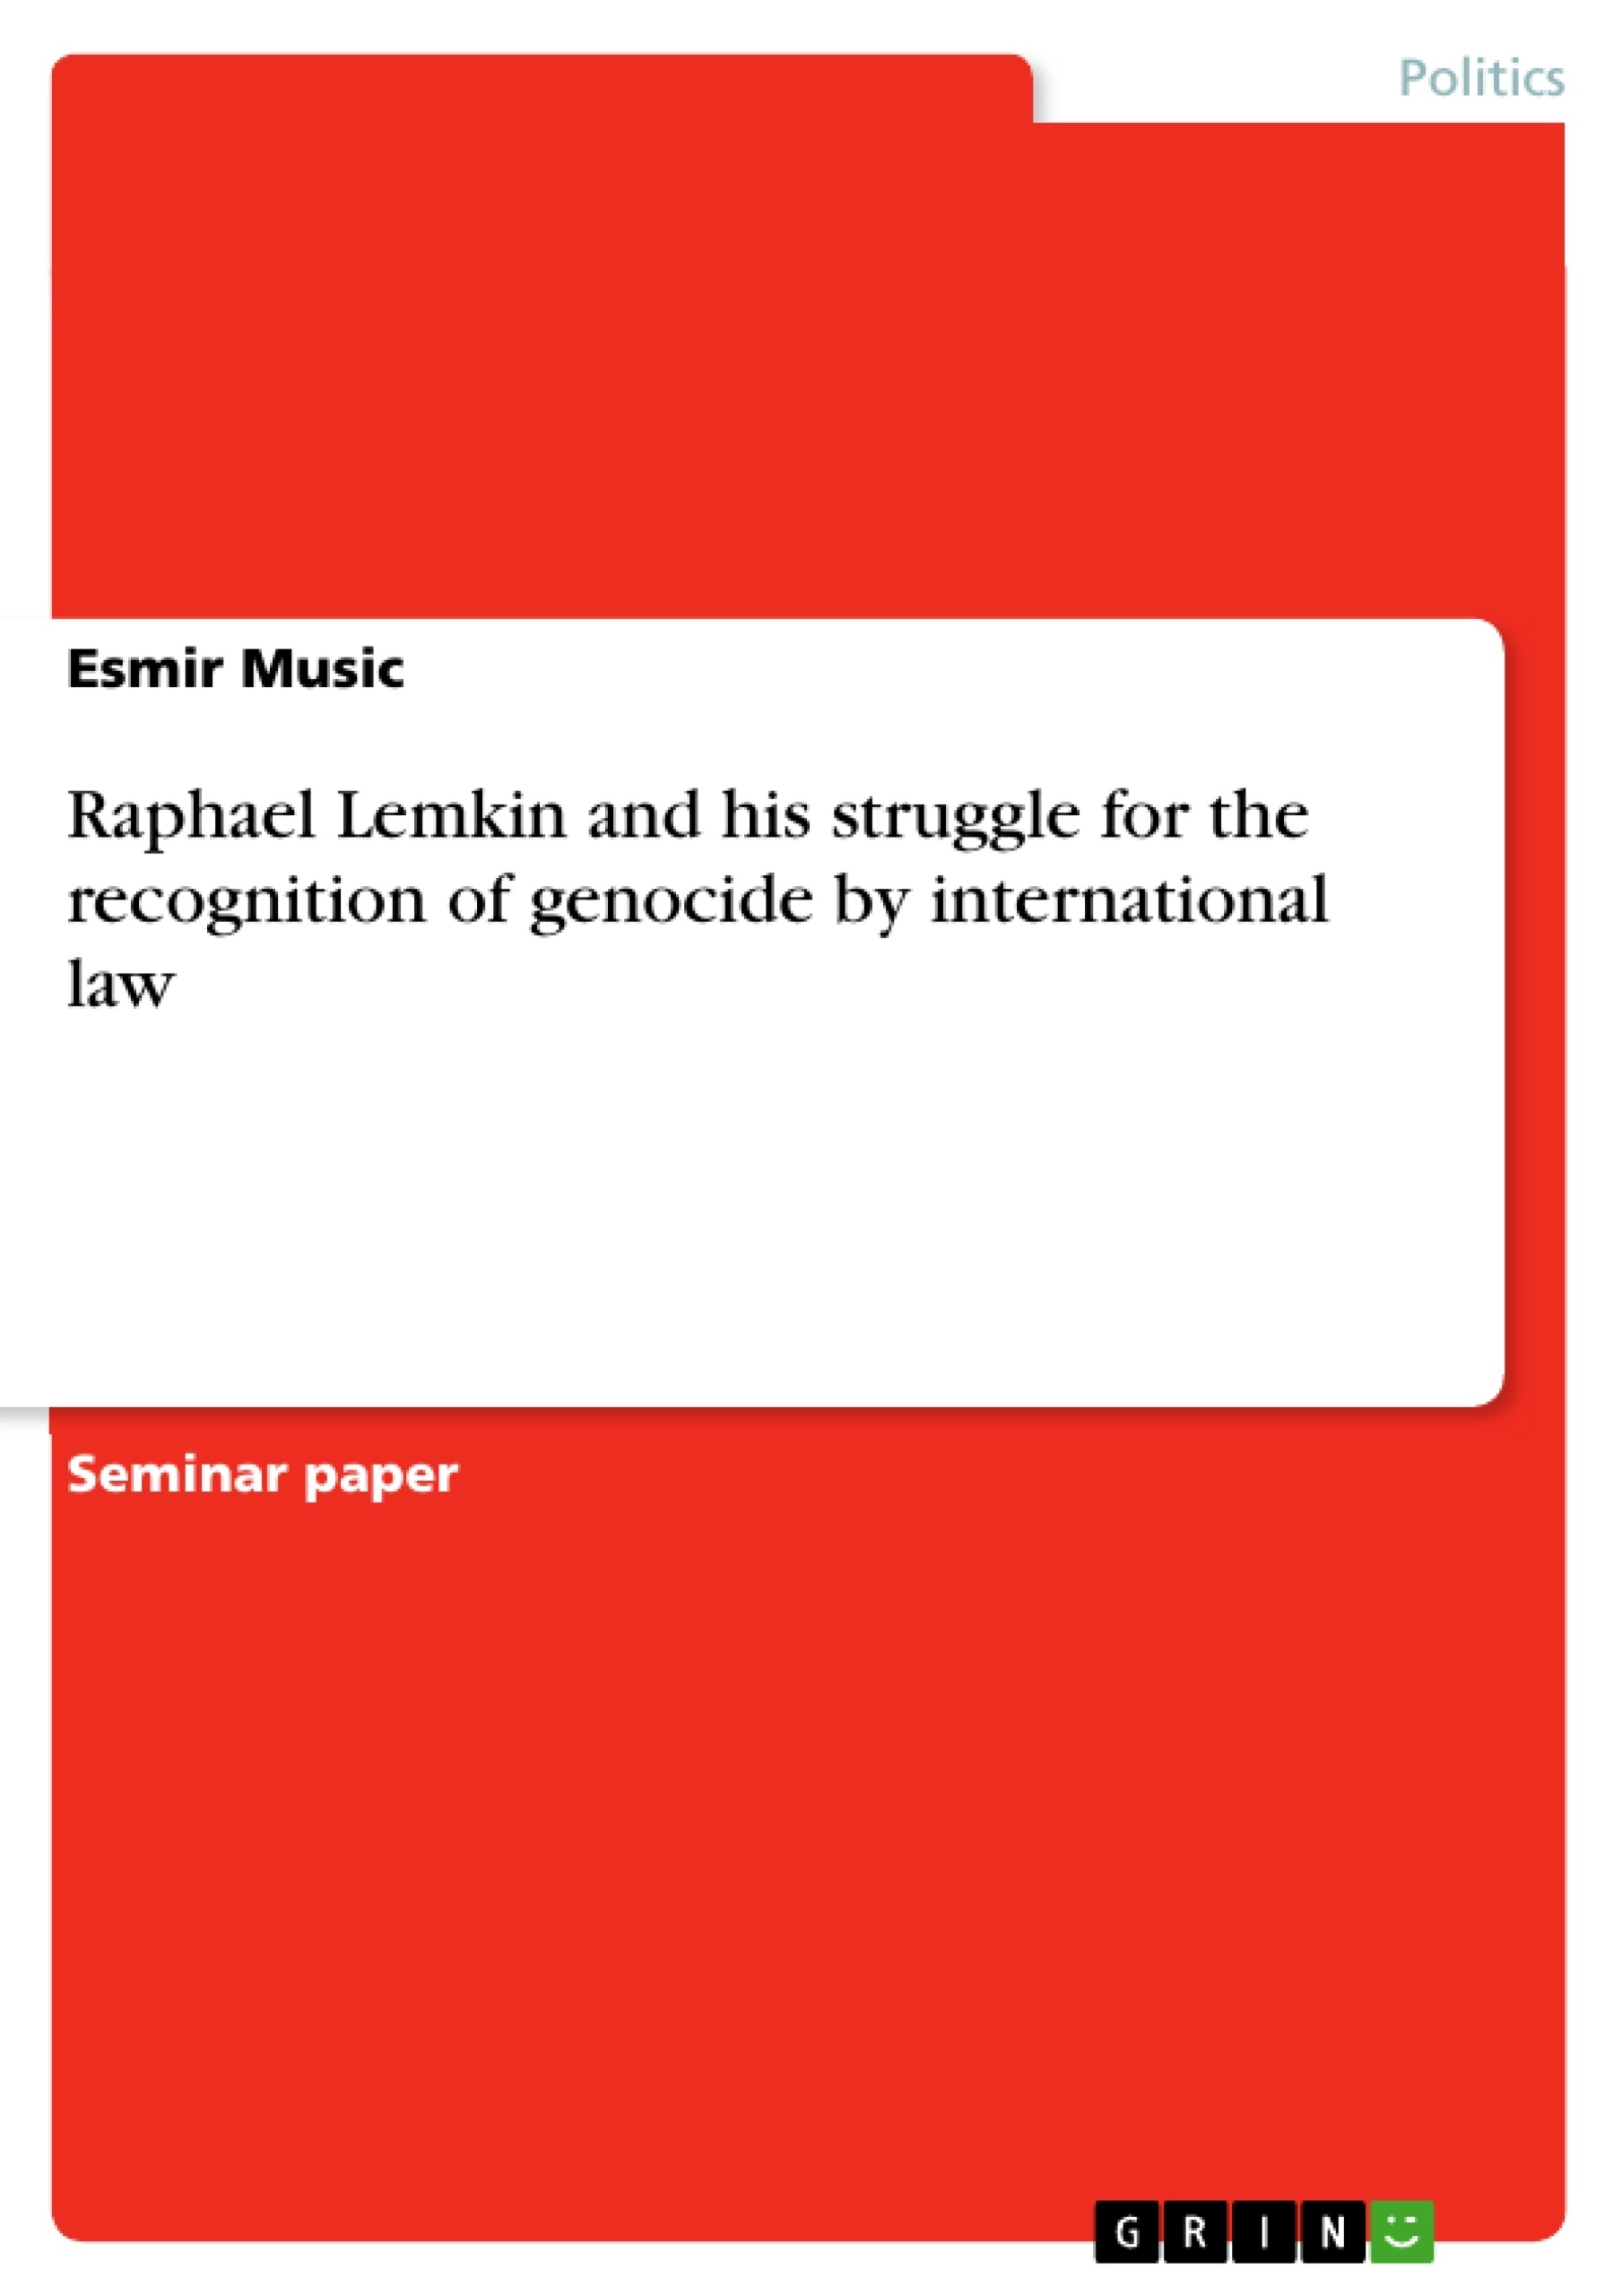 Title: Raphael Lemkin and his struggle for the recognition of genocide by international law